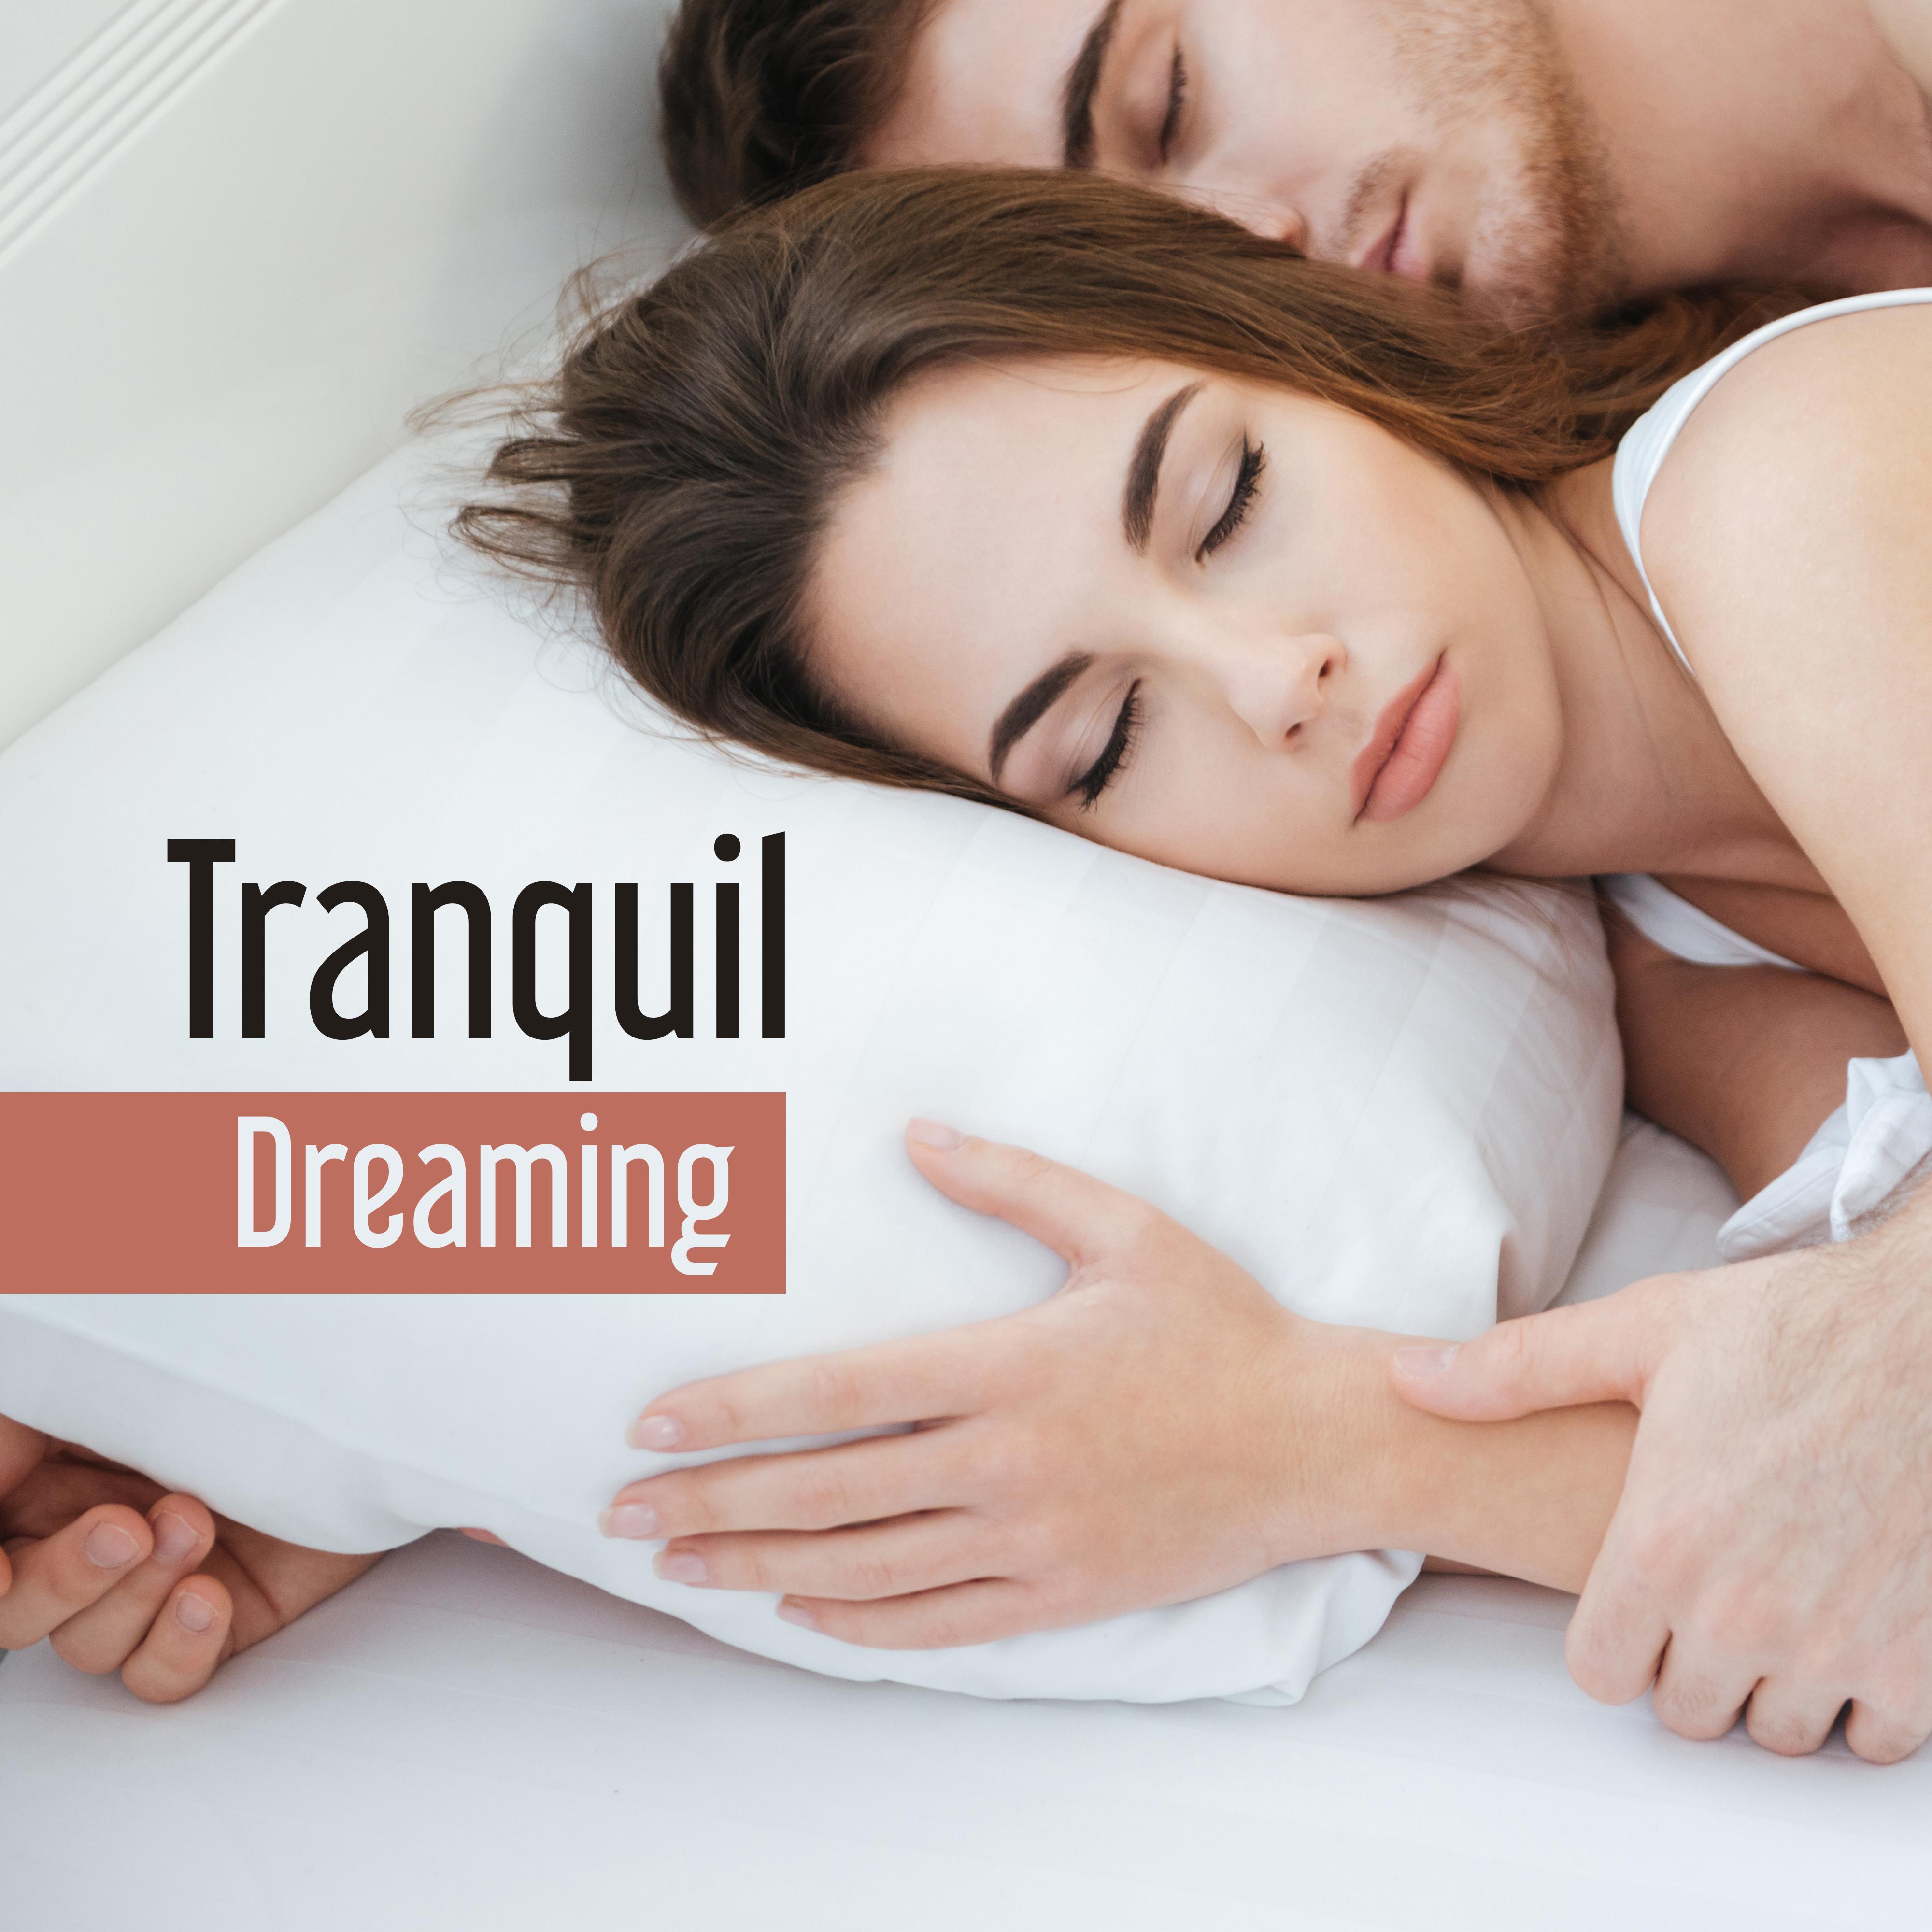 Tranquil Dreaming  Soft Songs for Sleep, Relaxation, Deep Relief, Night Chill, Quiet Nap, Healing Lullabies, Sweet Dreams